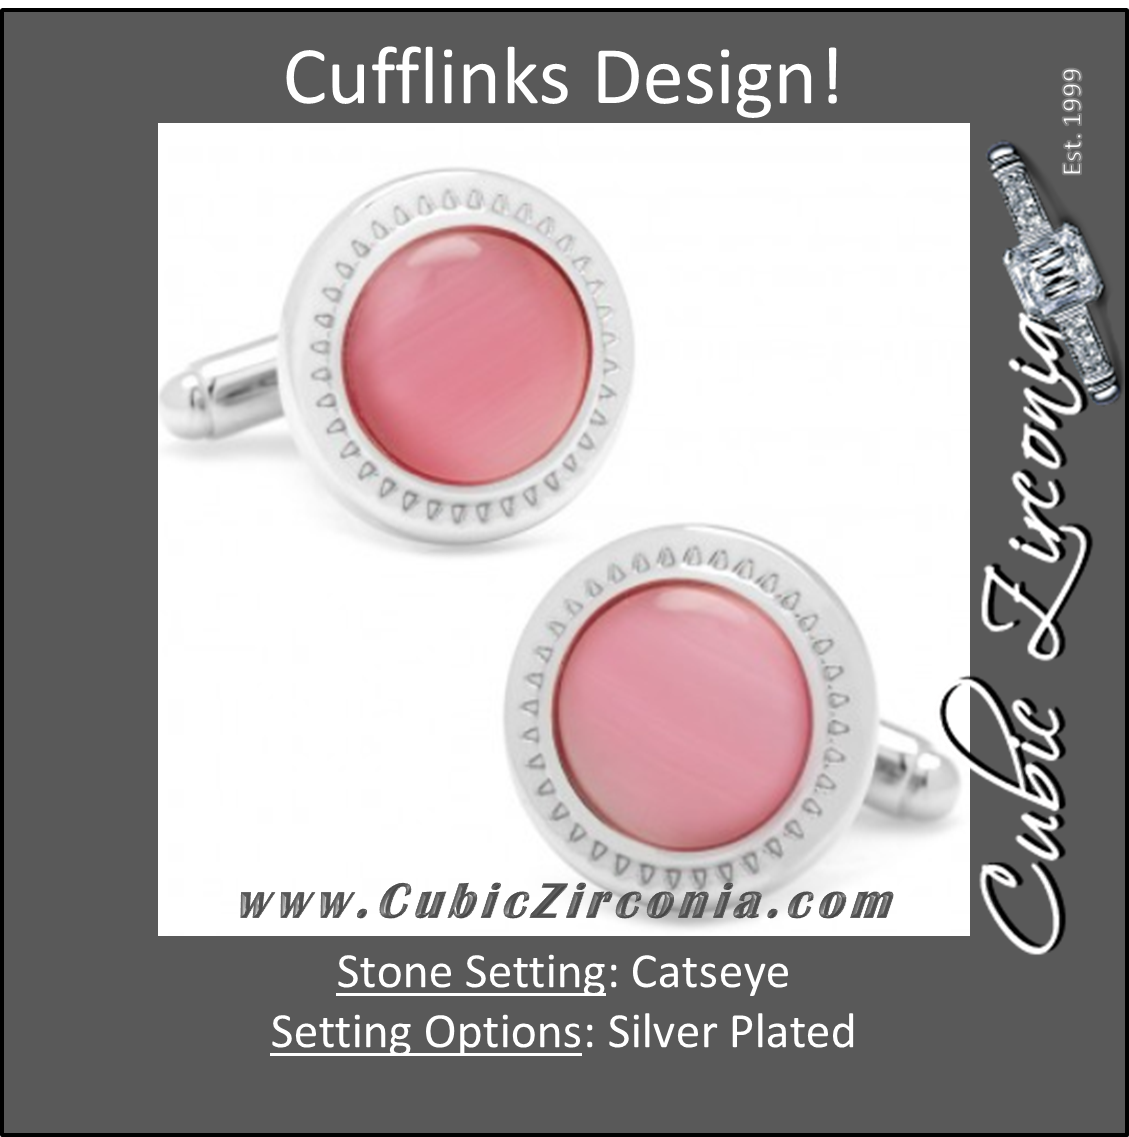 Men’s Cufflinks- Pink Catseye with Etched Circular Border